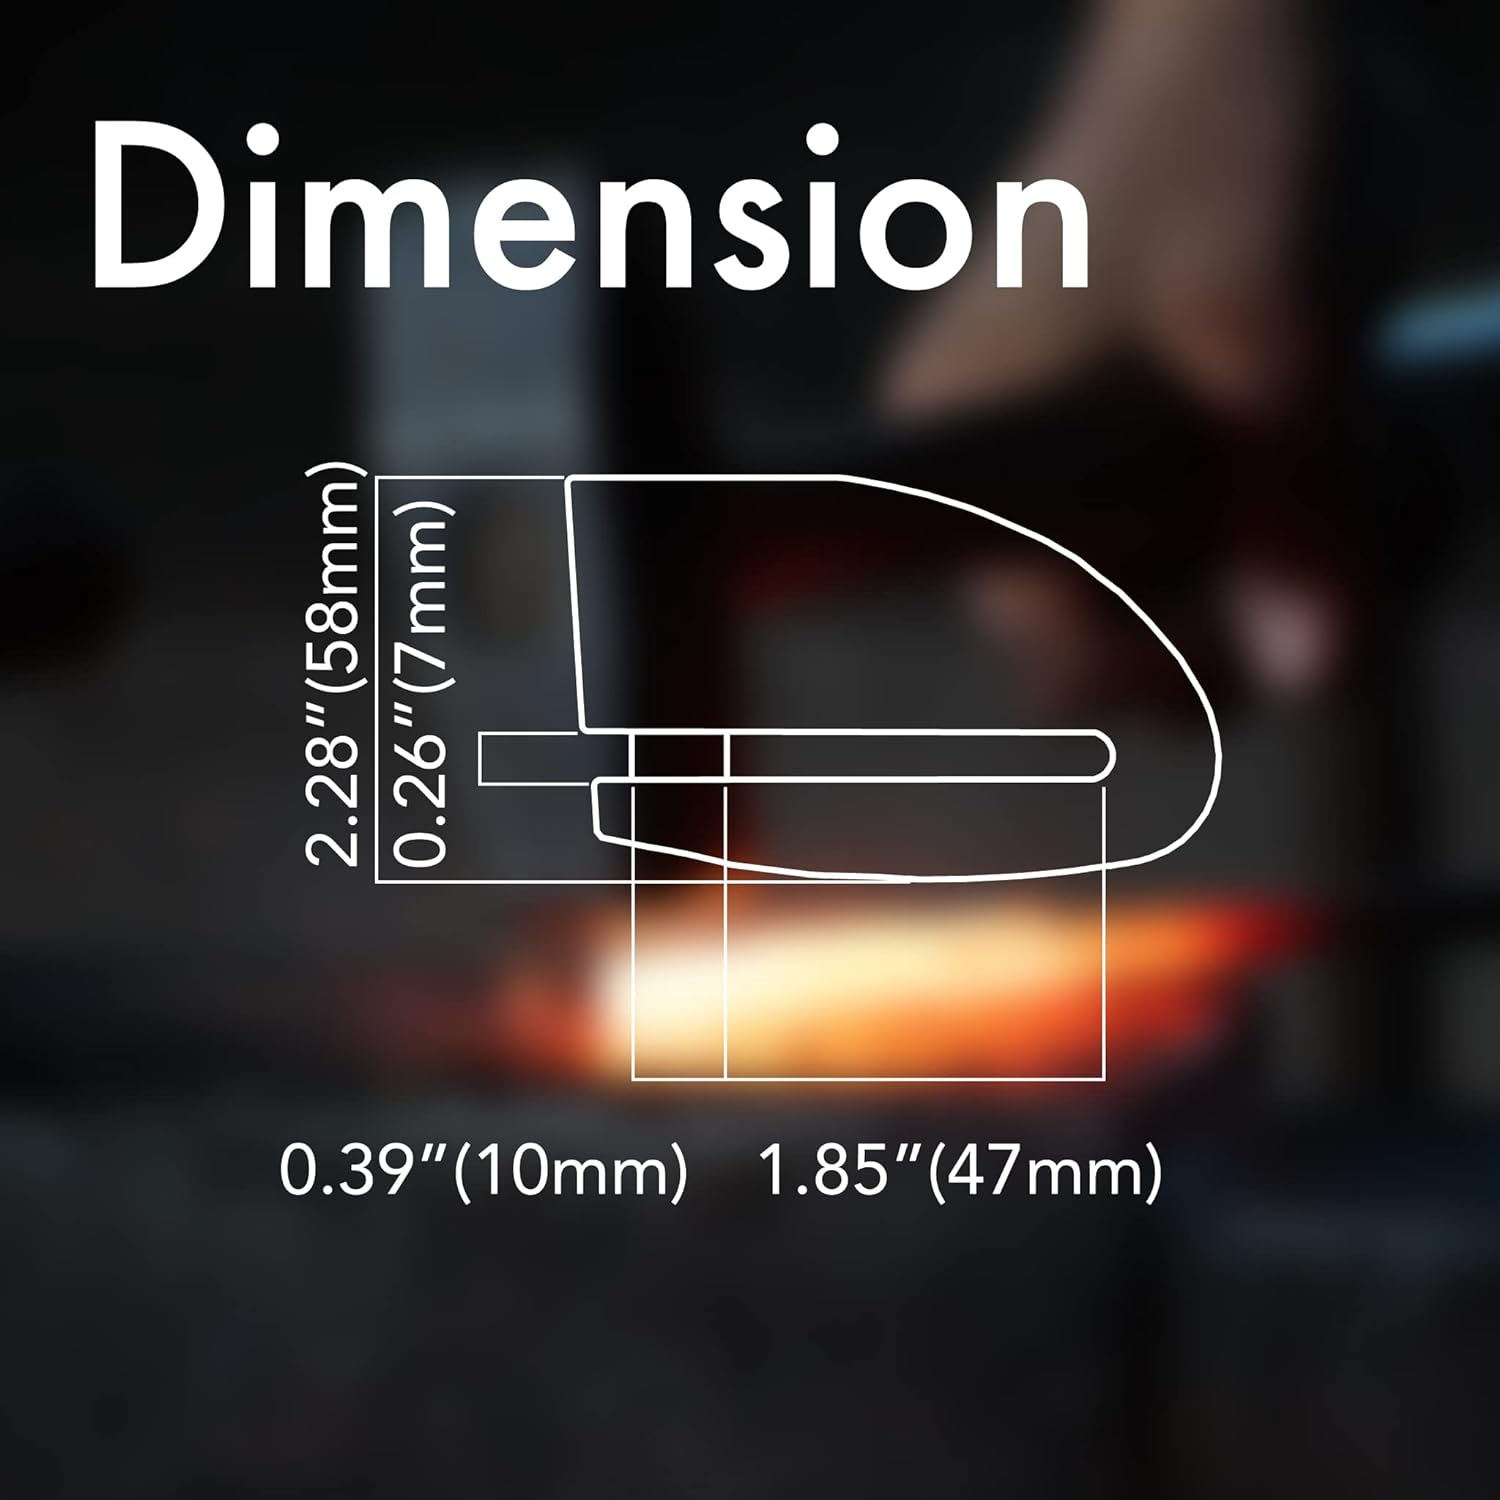 The image presents a technical illustration showing the dimensions of a lock mechanism, with measurements that highlight the product's size and the diameter of its components. The clear, precise figures allow for easy understanding of the lock's physical specifications, important for potential buyers to assess its suitability for their needs